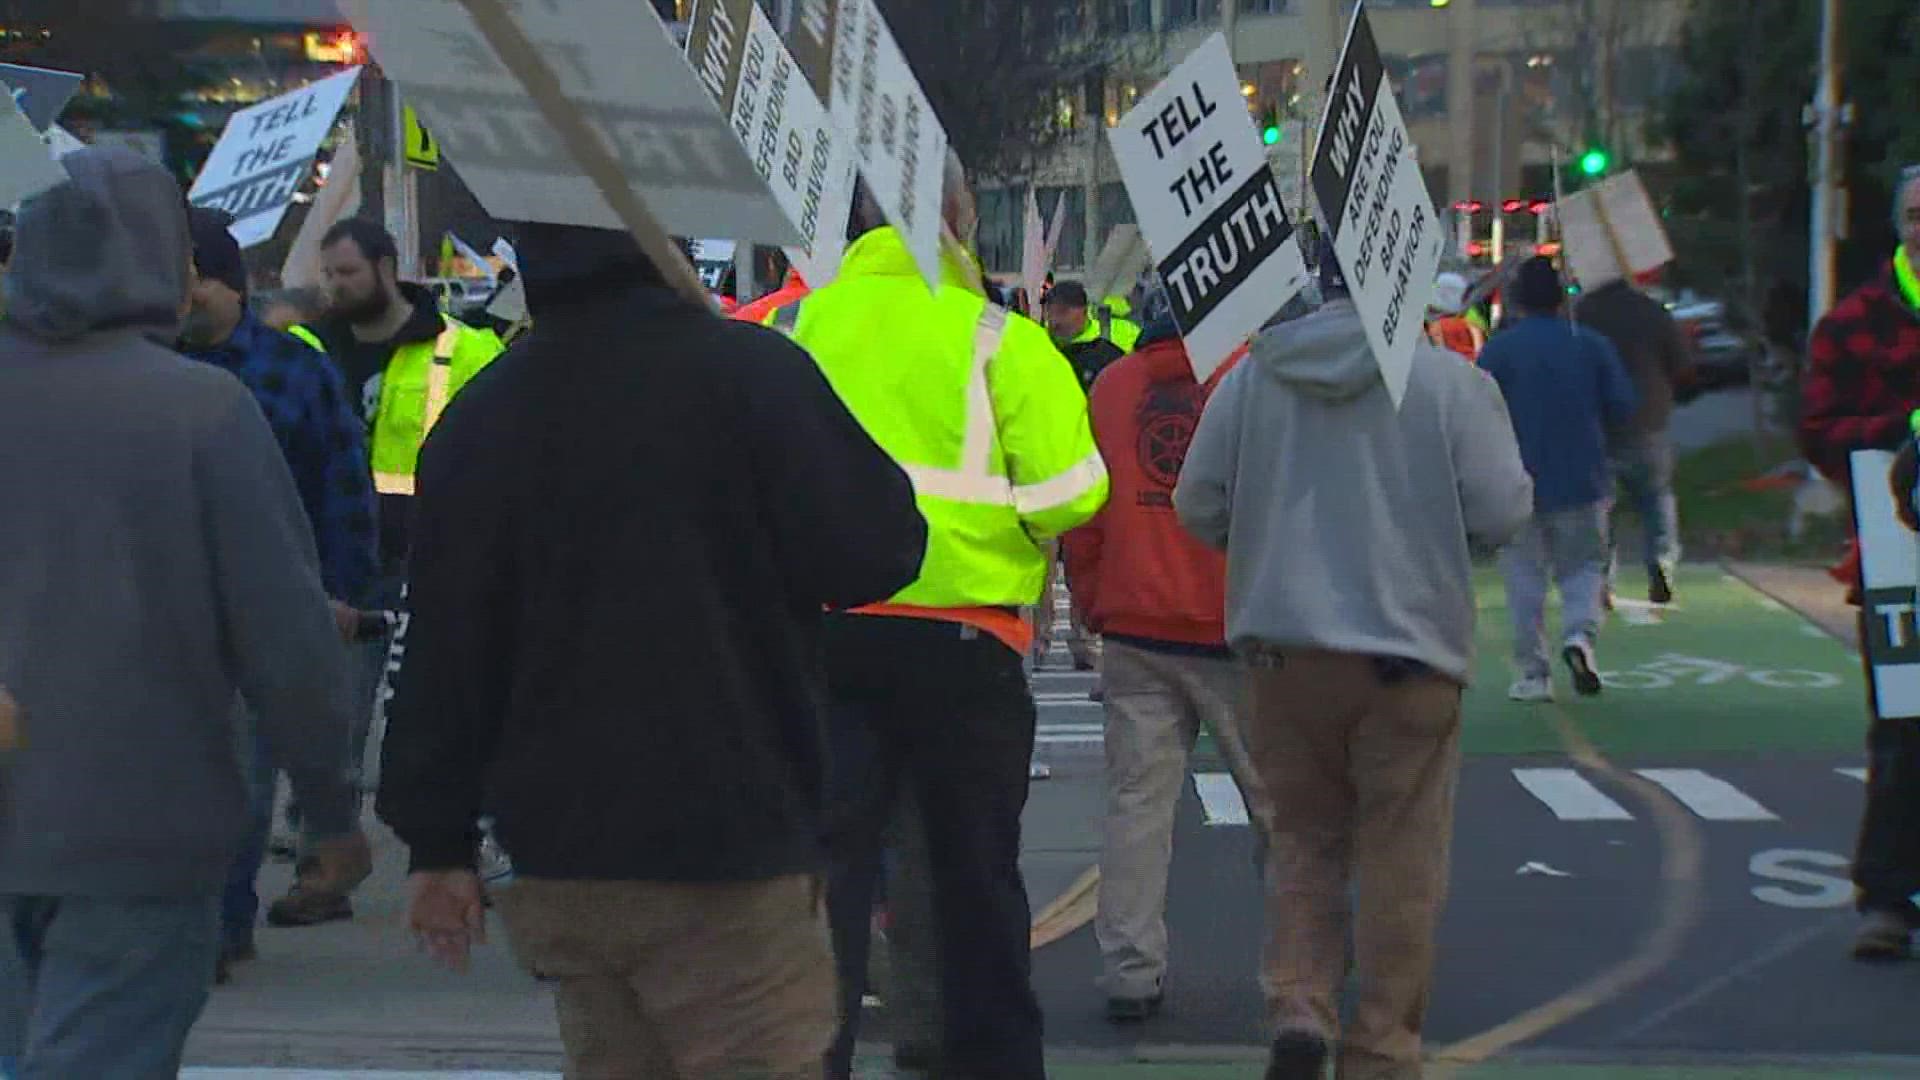 Over 300 concrete workers are on strike, bringing construction around Washington to a screeching halt.